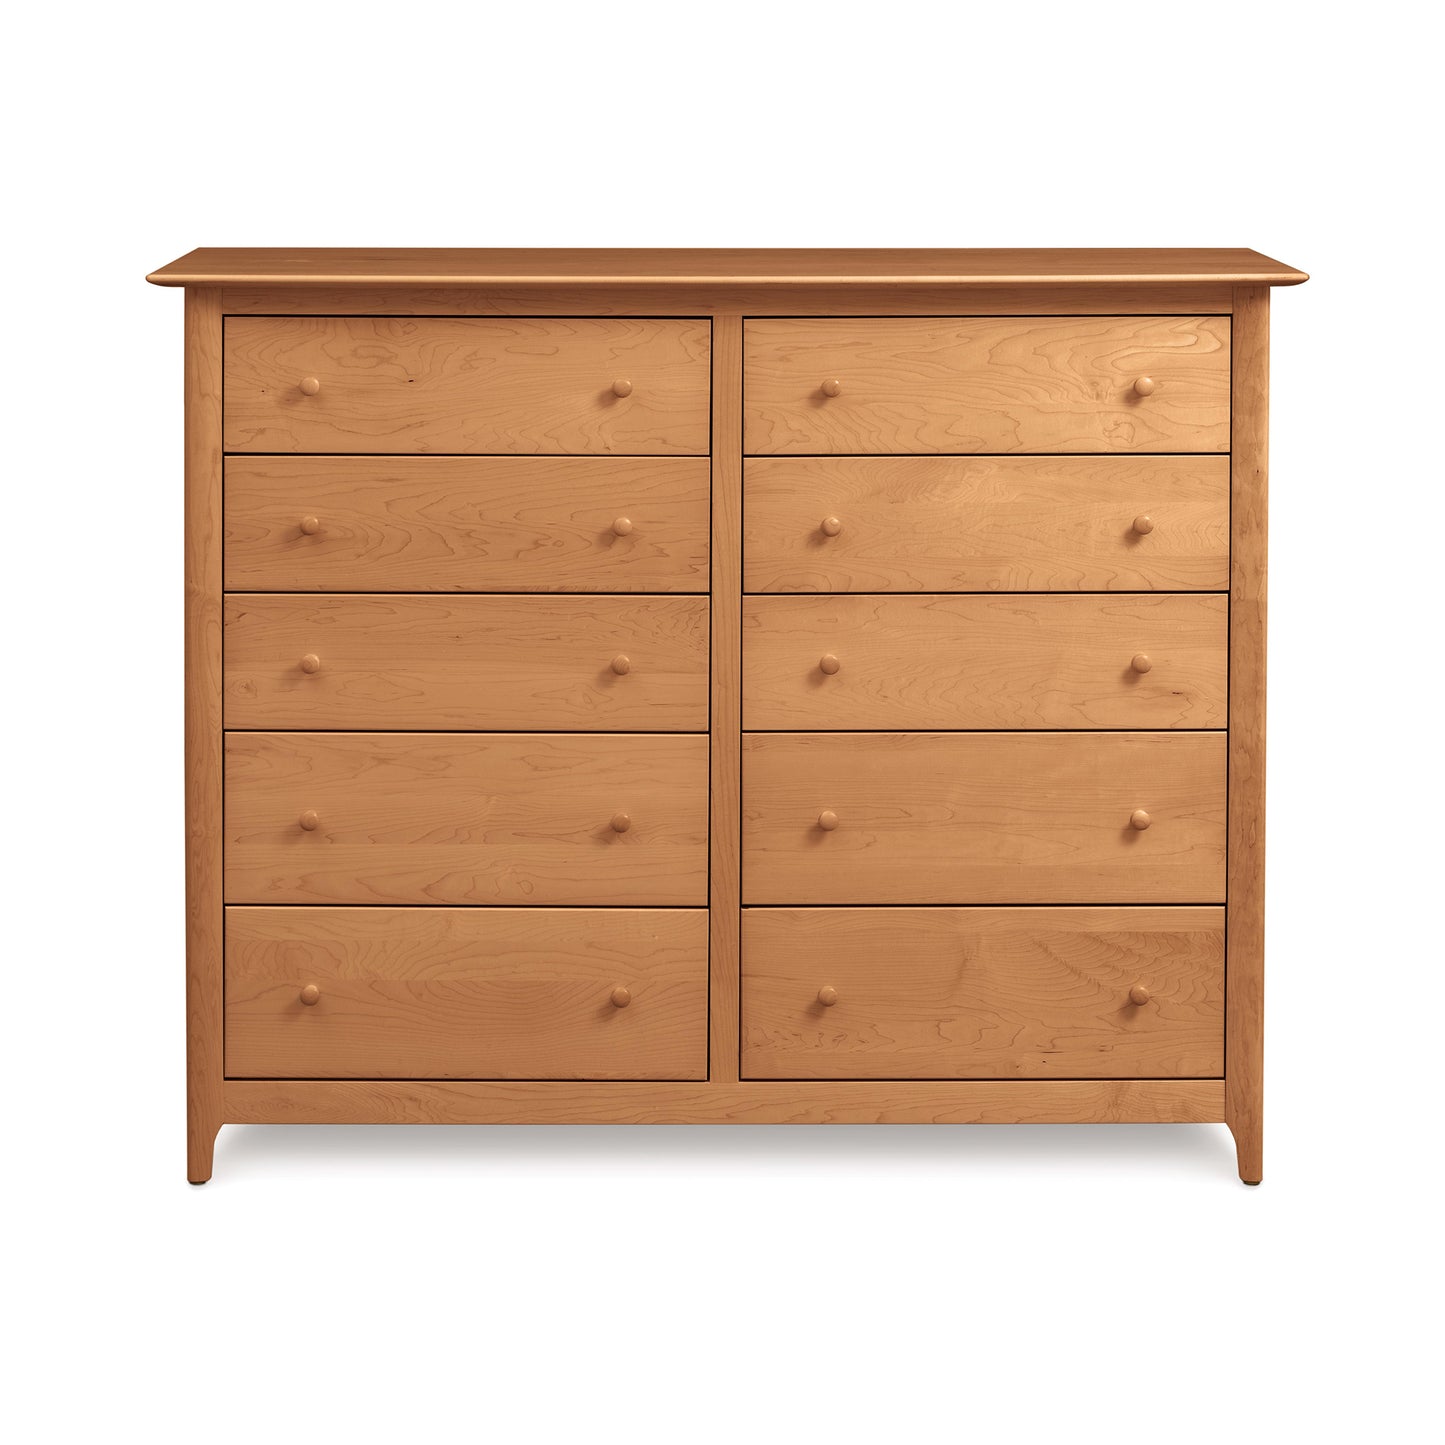 A handmade wooden Sarah 10-Drawer Dresser by Copeland Furniture with drawers in a Shaker design, showcased on a white background.